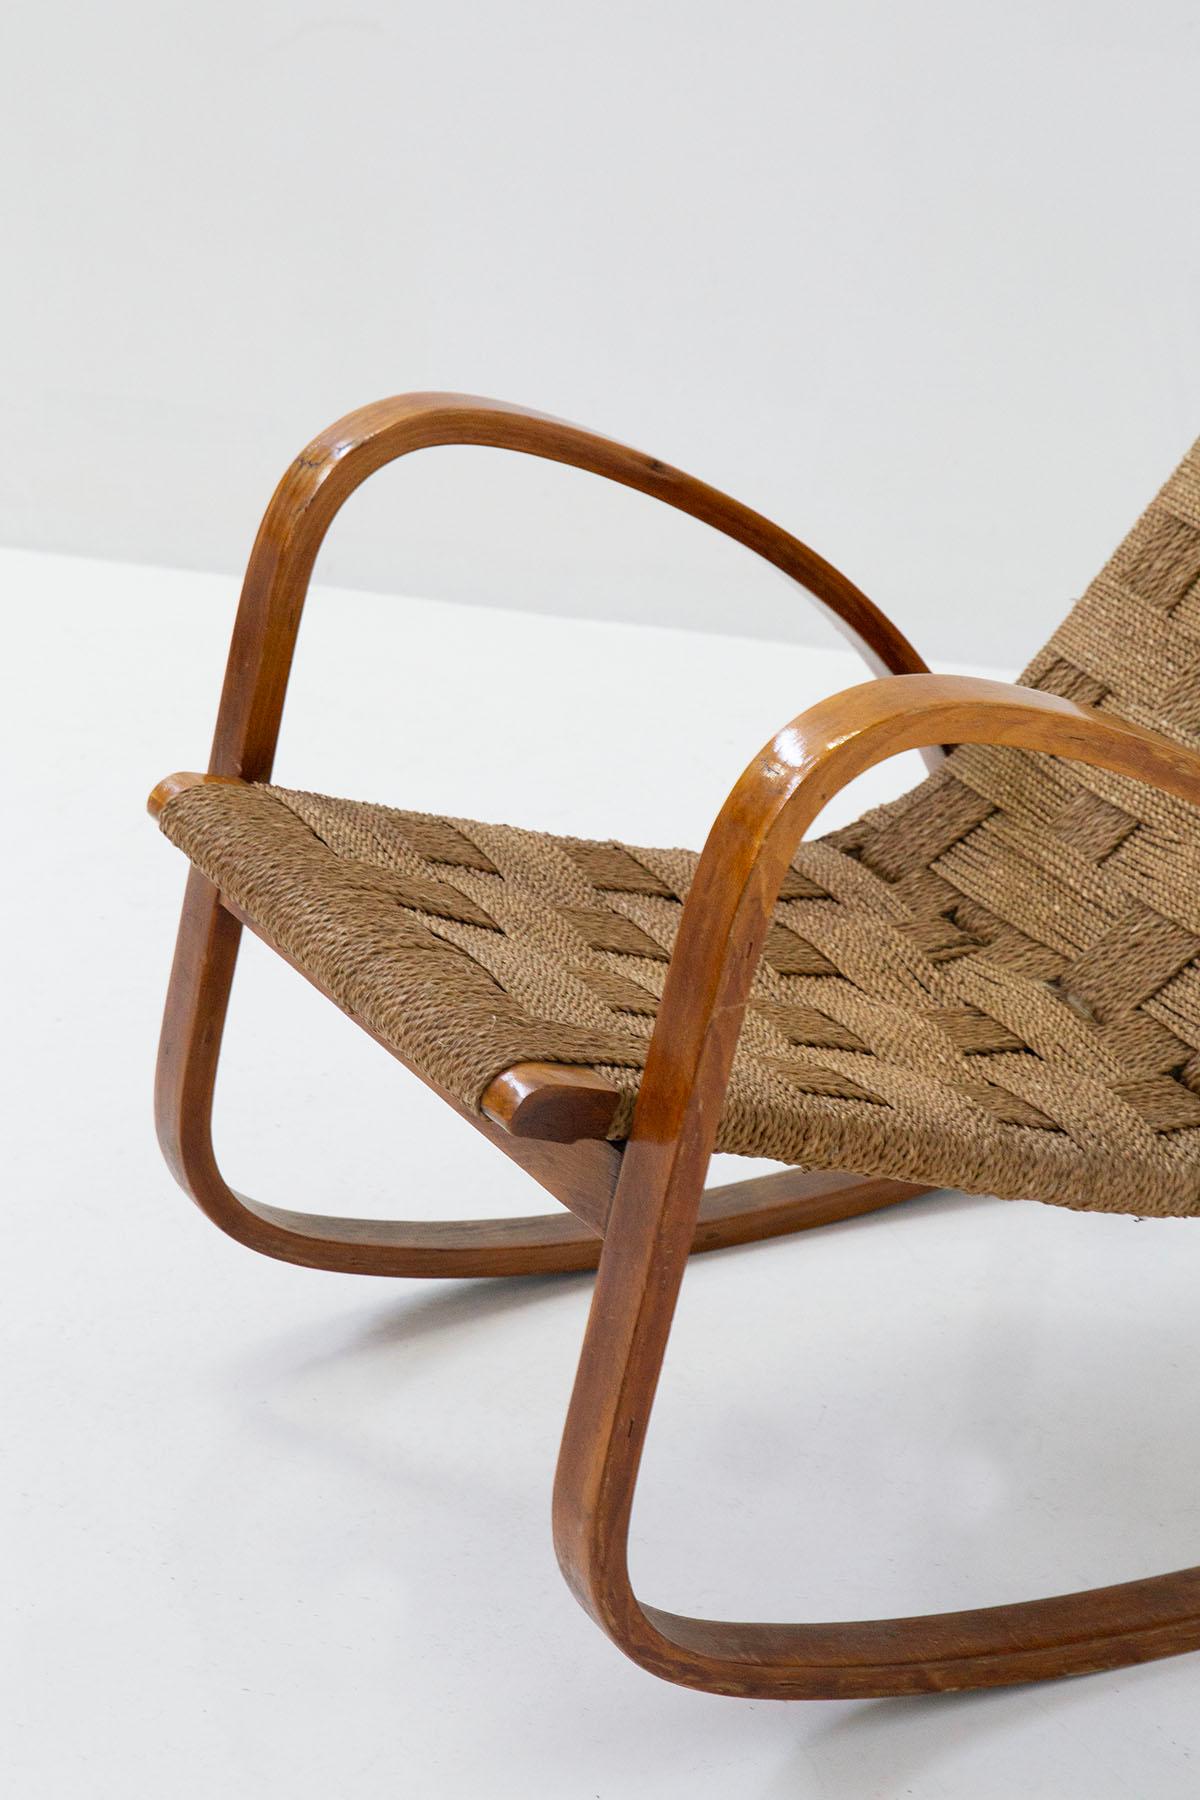 Bauhaus Italian Rocking Armchair from the Rationalist Period, in of Rope For Sale